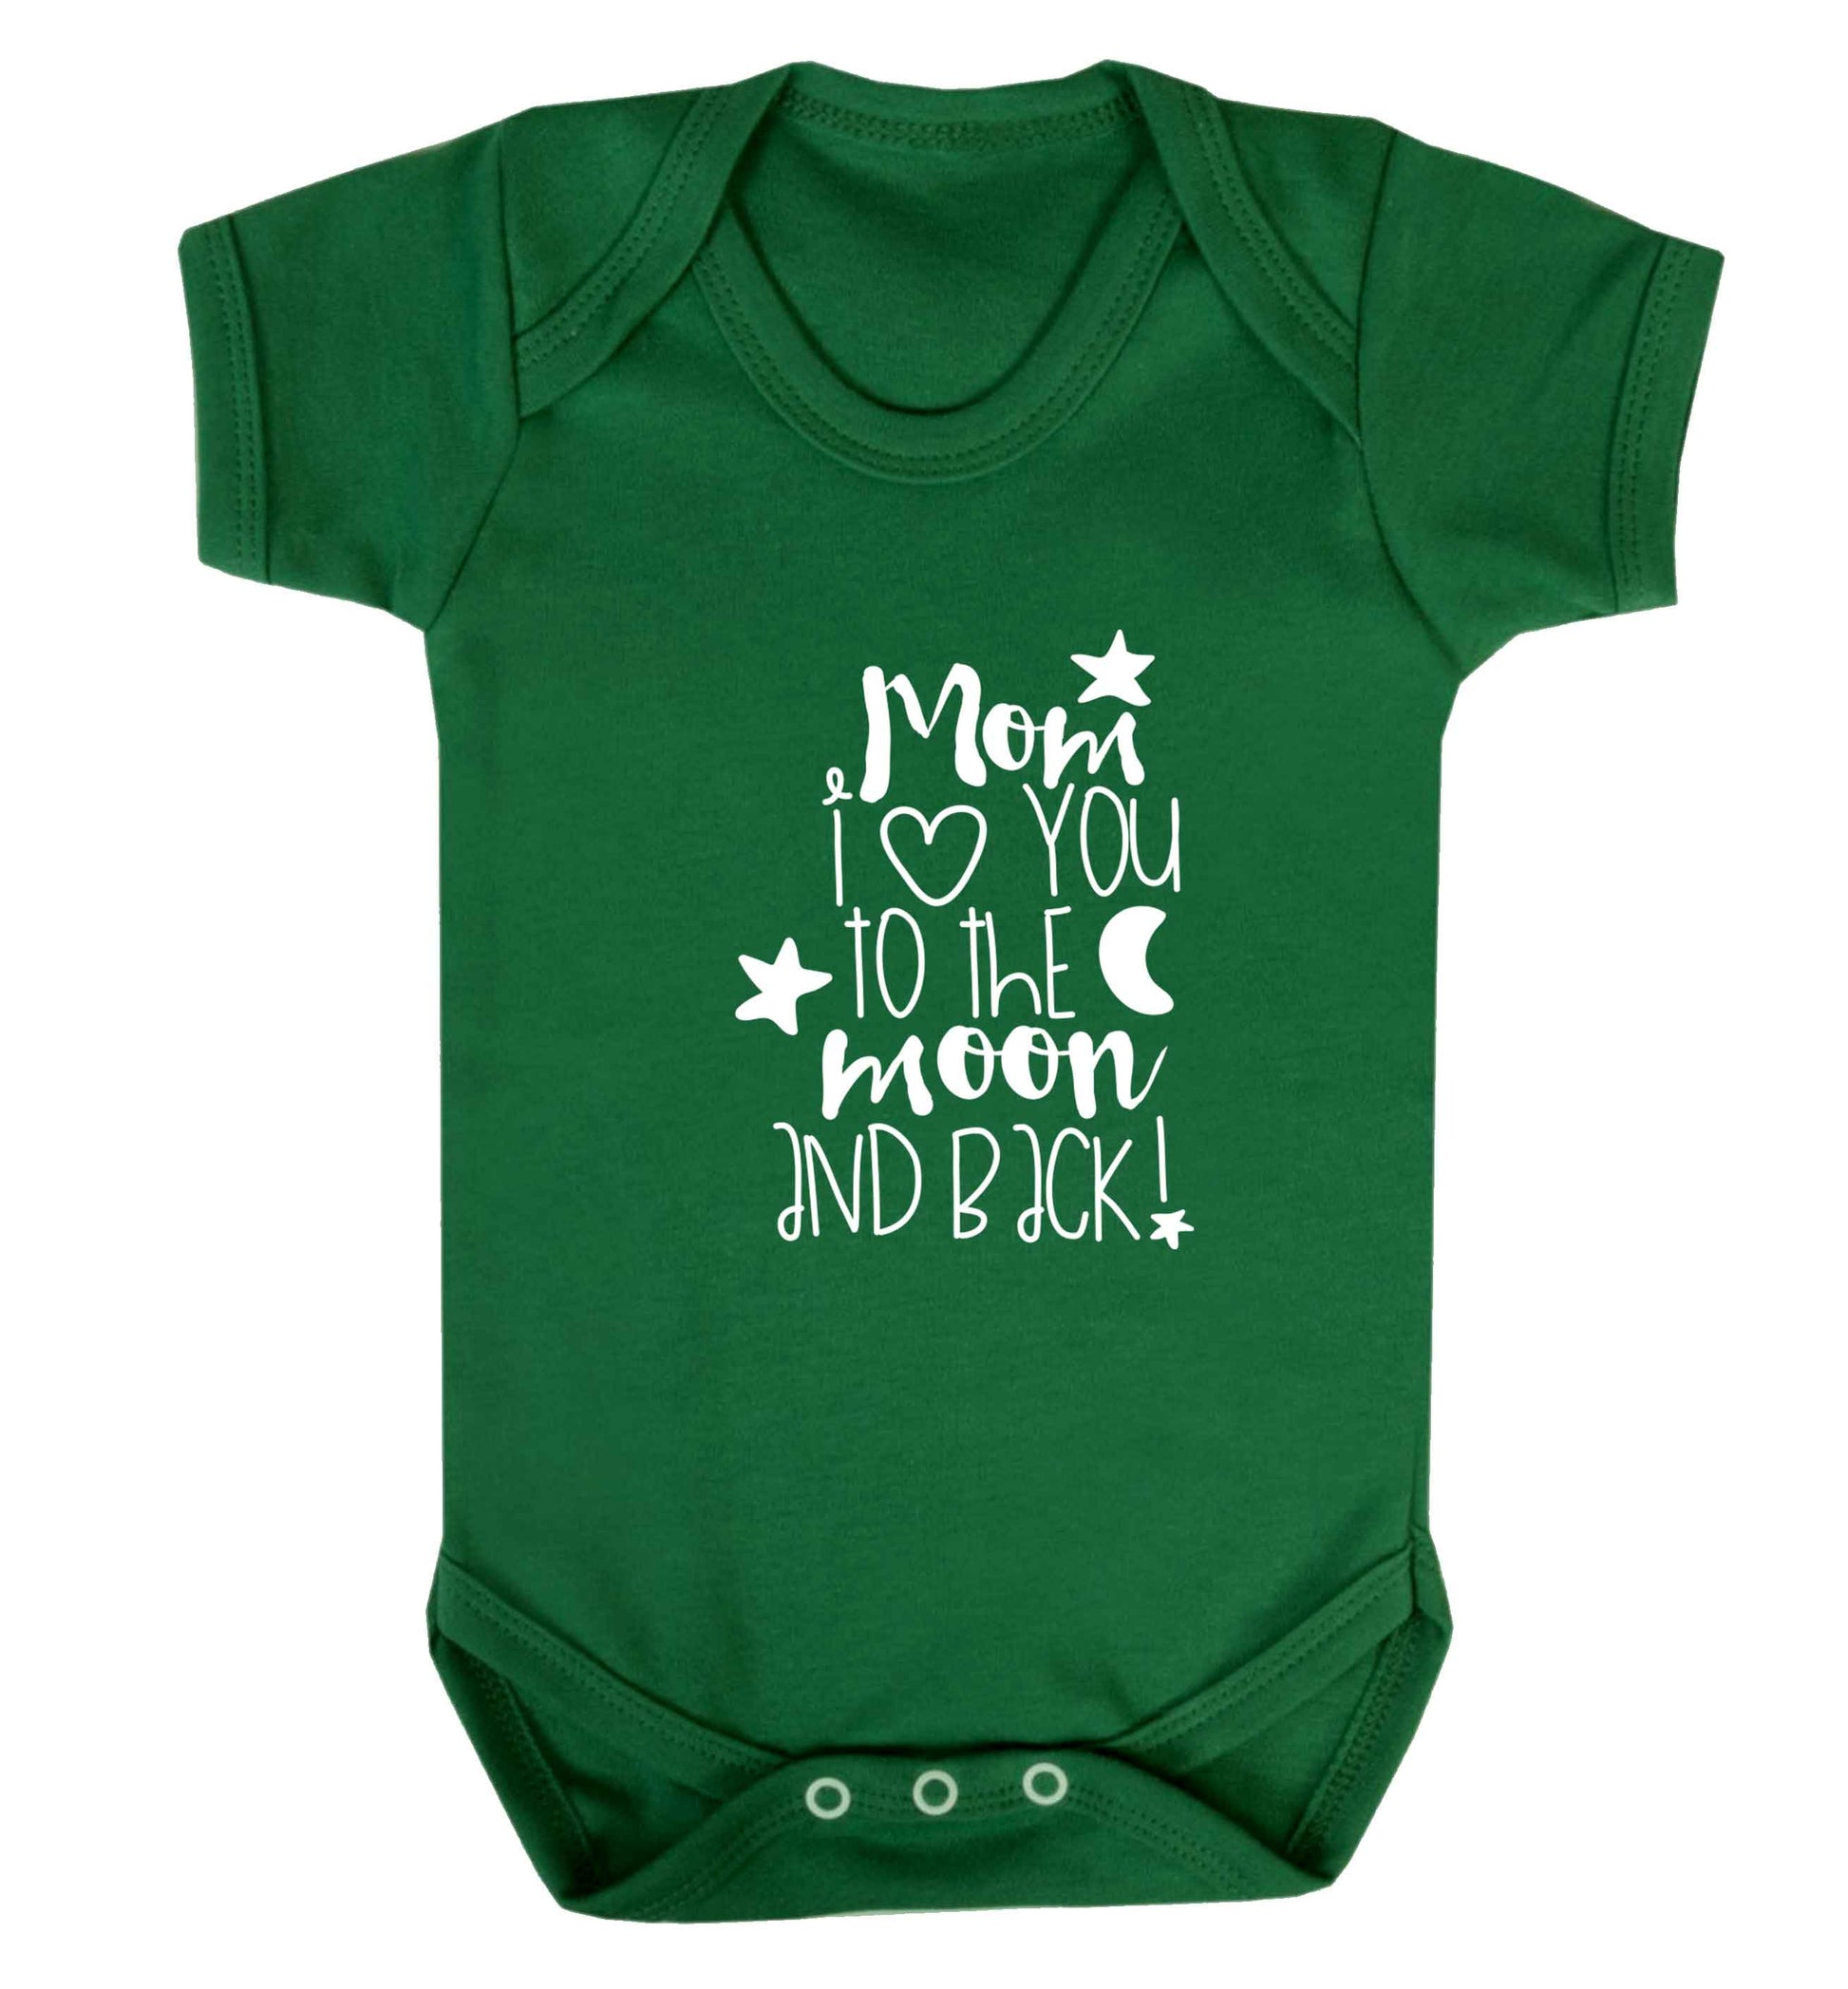 Mom I love you to the moon and back baby vest green 18-24 months